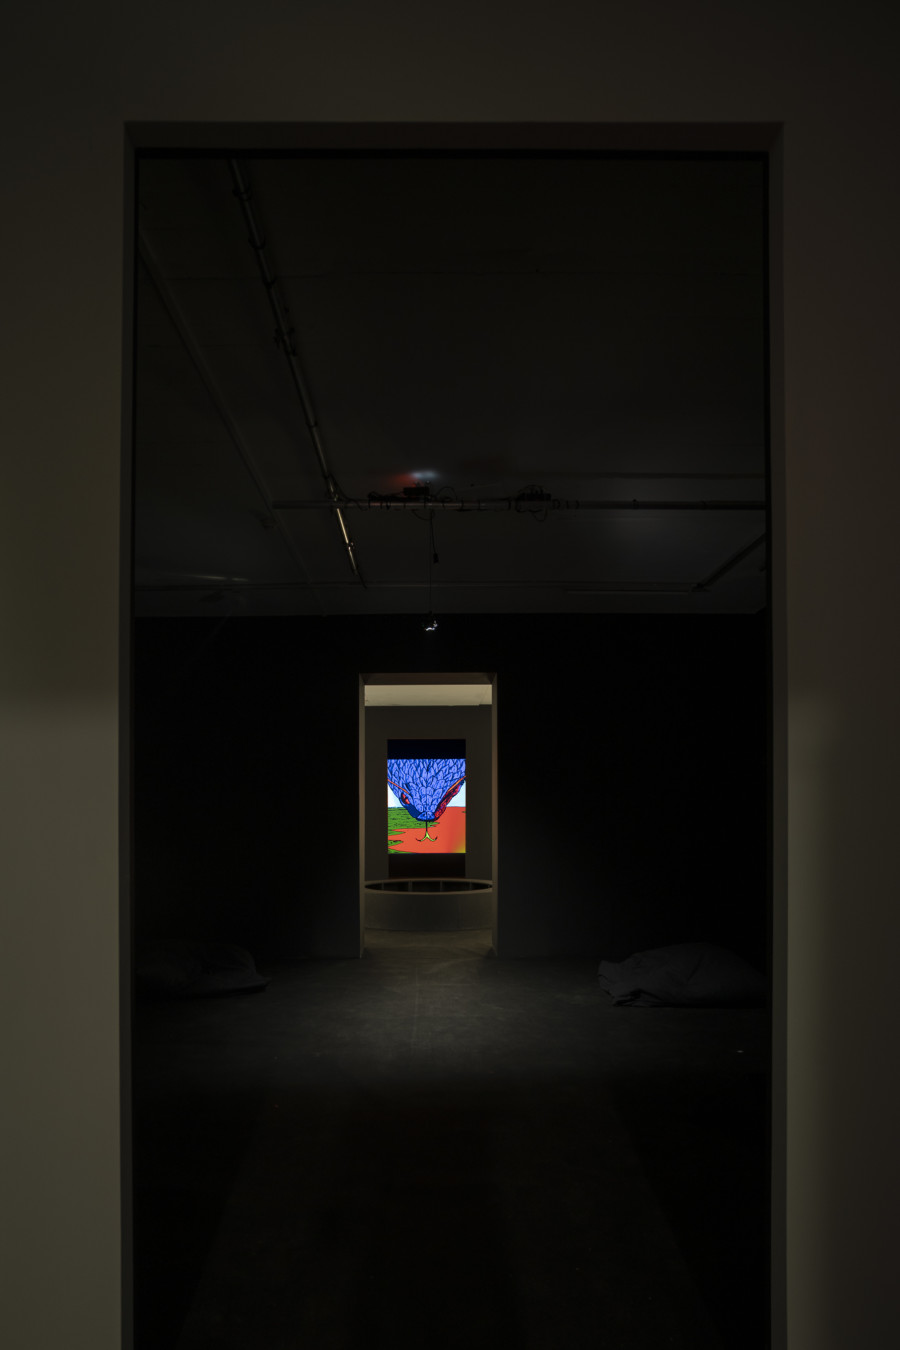 Exhibition view of Across the Policed World: A Transnocturnal Huayño at Centre d’Art Contemporain Genève (March 5, 2022‒May 1, 2022). © Centre d’Art Contemporain Genève. Photo: Julien Girard